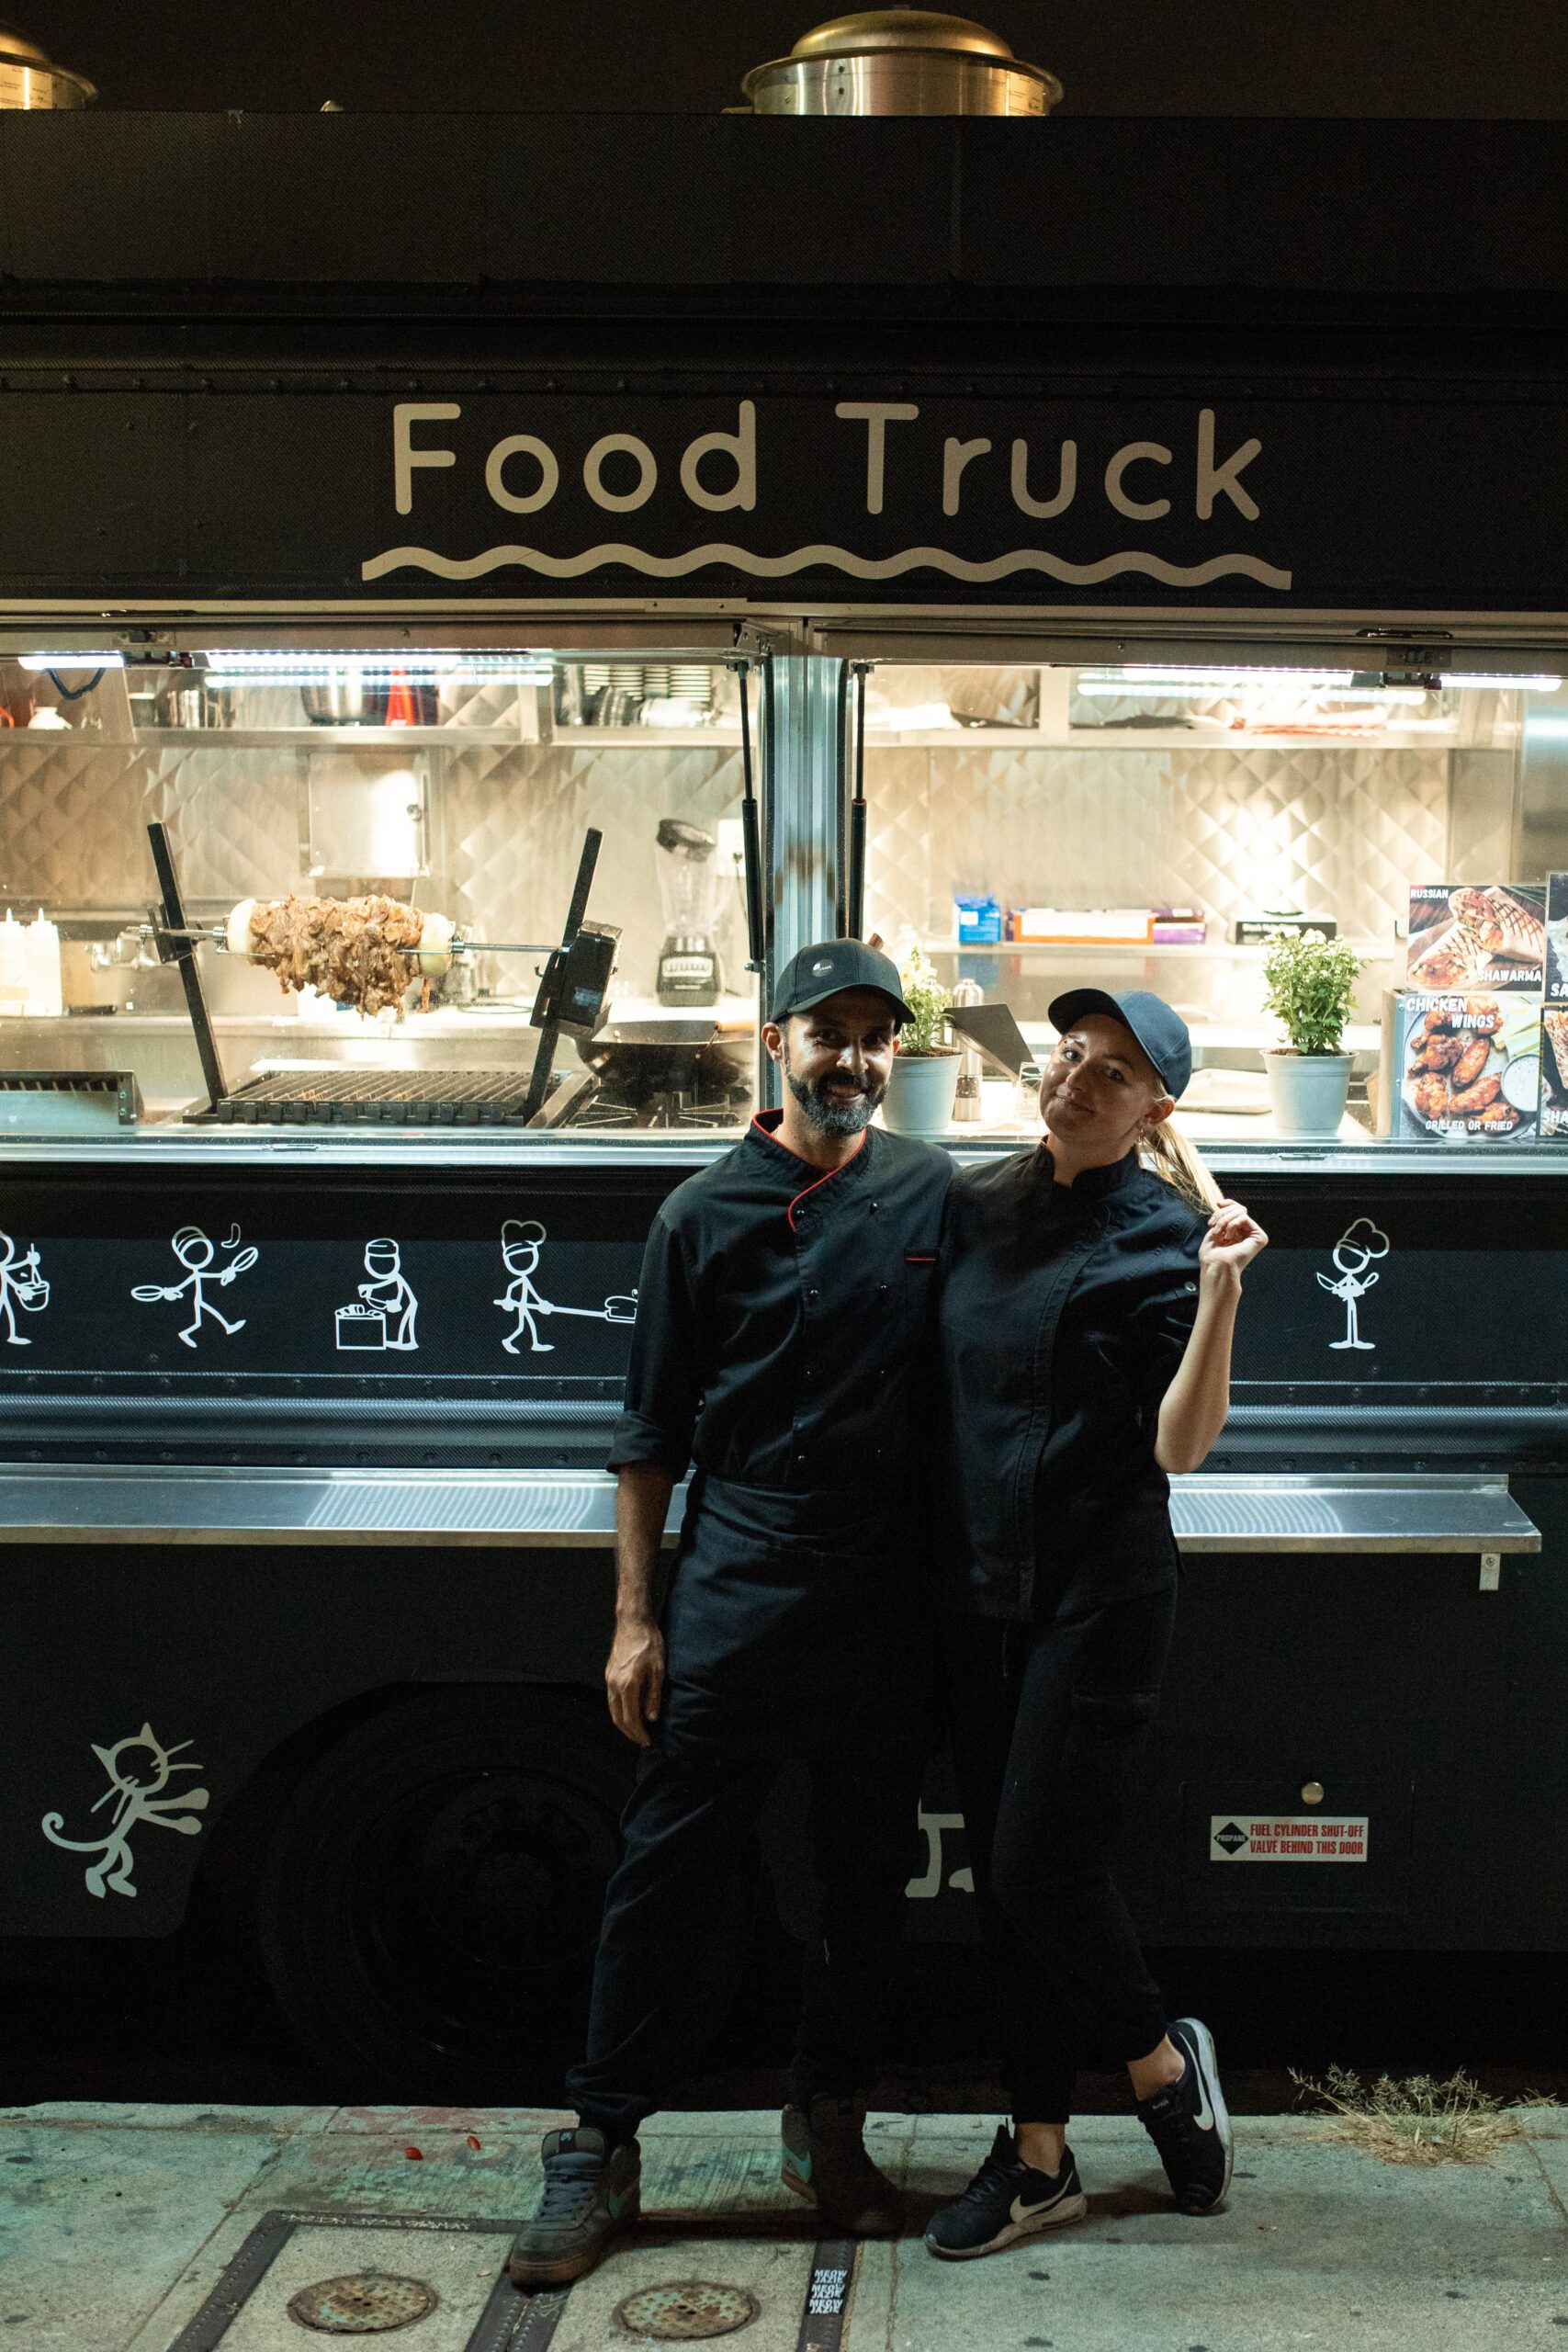 food truck owners standing in front of truck